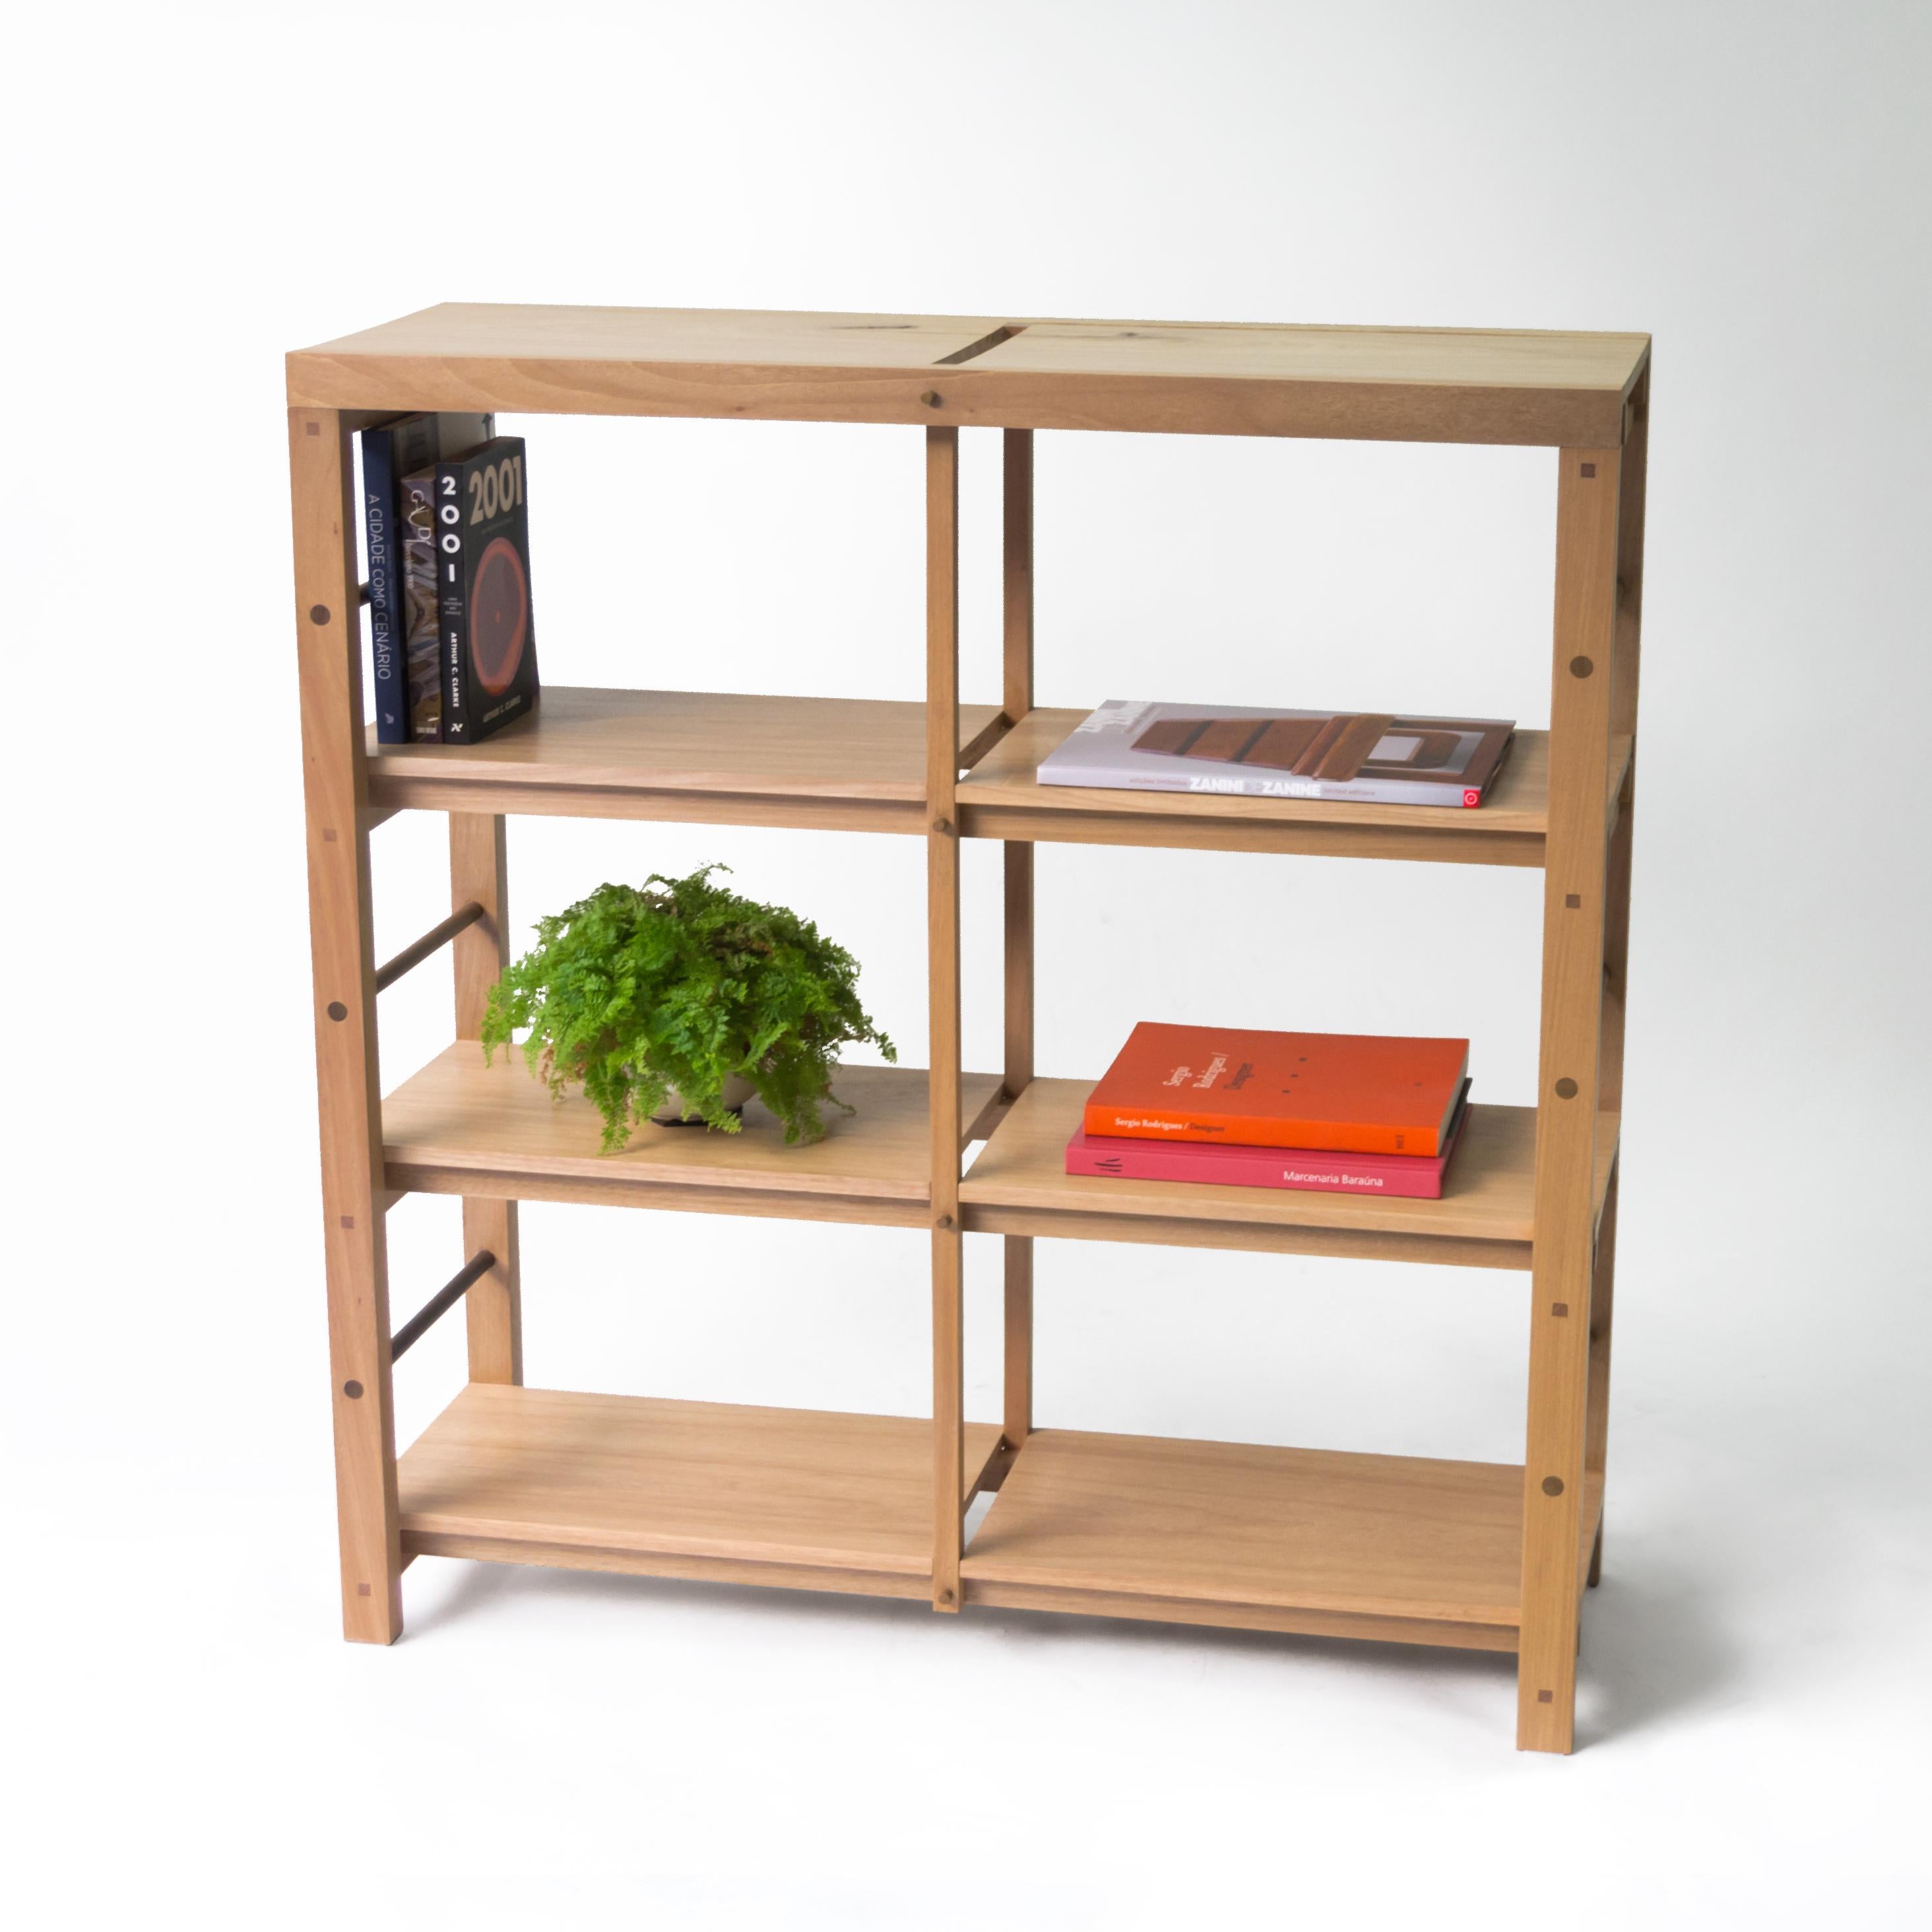 Ideal furniture for storing books and decorative pieces.
It also works as a sideboard and can be used in kitchens or dining rooms to store crockery and cutlery.

Built using traditional joinery techniques, no screws. Jequitibá-Rosa wood, details